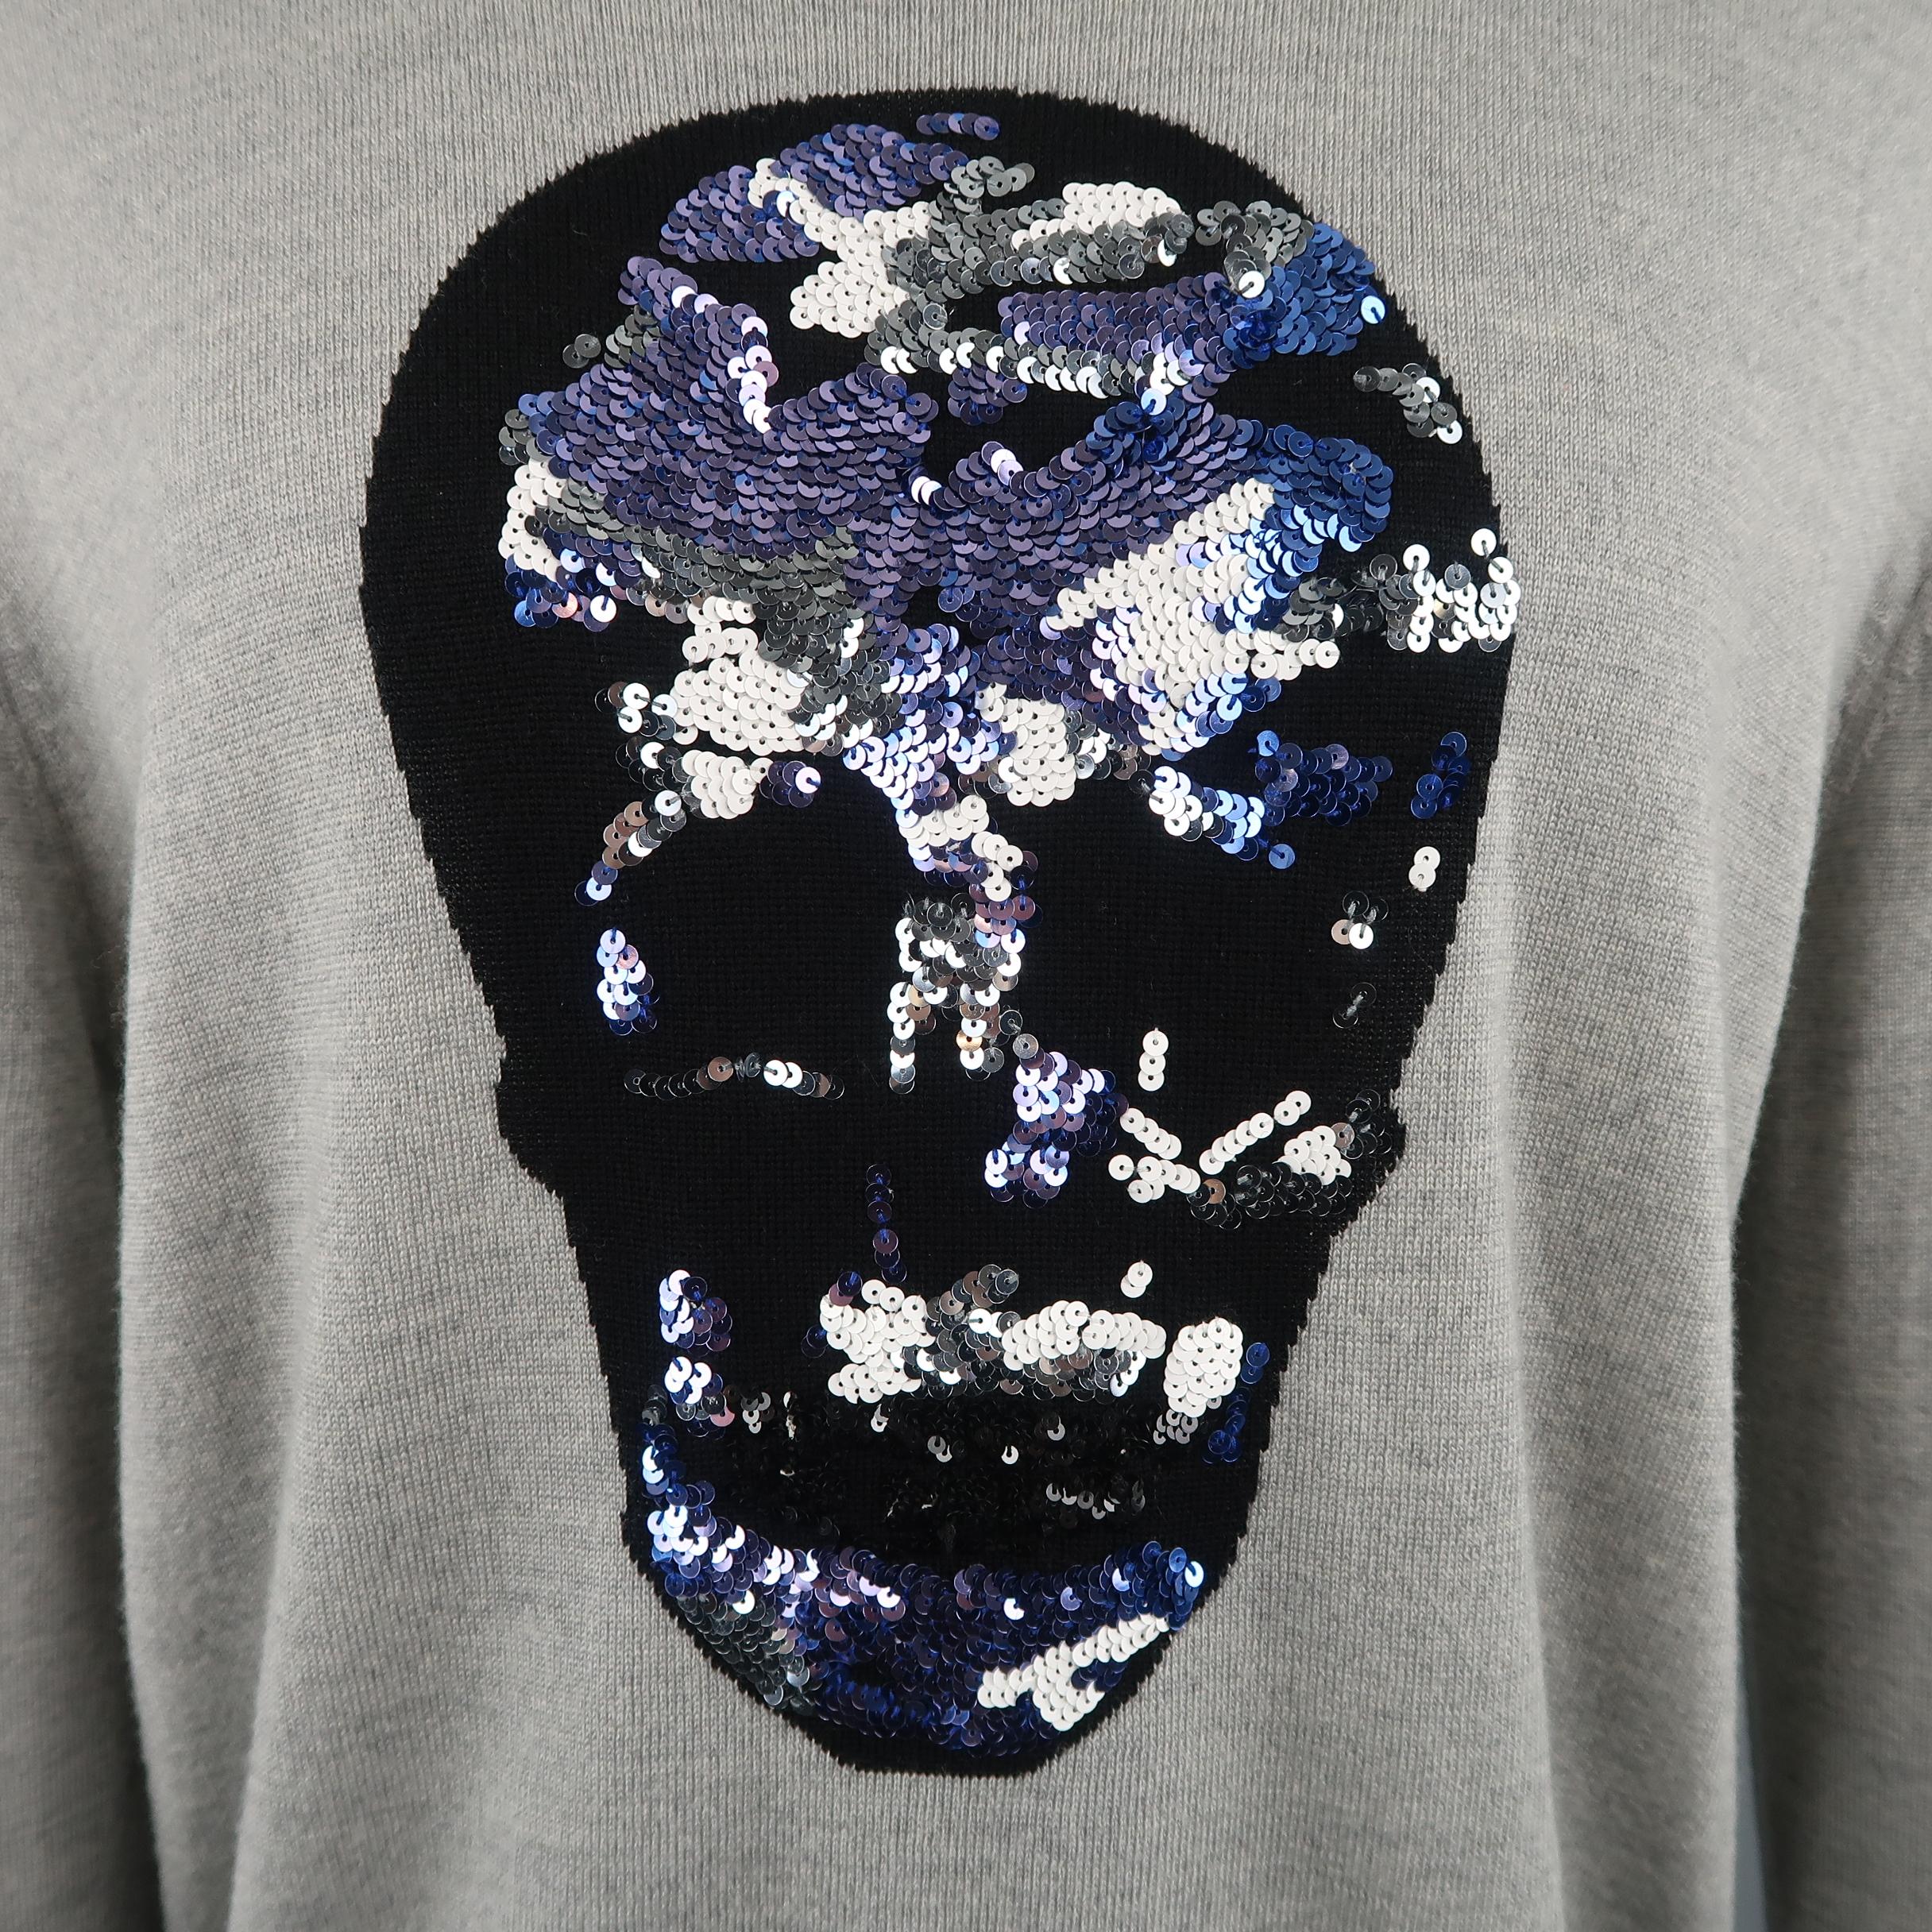 MARKUS LUPFER pullover sweater comes in light gray merino wool knit with a crewneck and black skull graphic embellished with blue and white sequin.
 
Excellent Pre-Owned Condition.
Marked: (no size)
 
Measurements:
 
Shoulder: 20 in.
Chest: 42